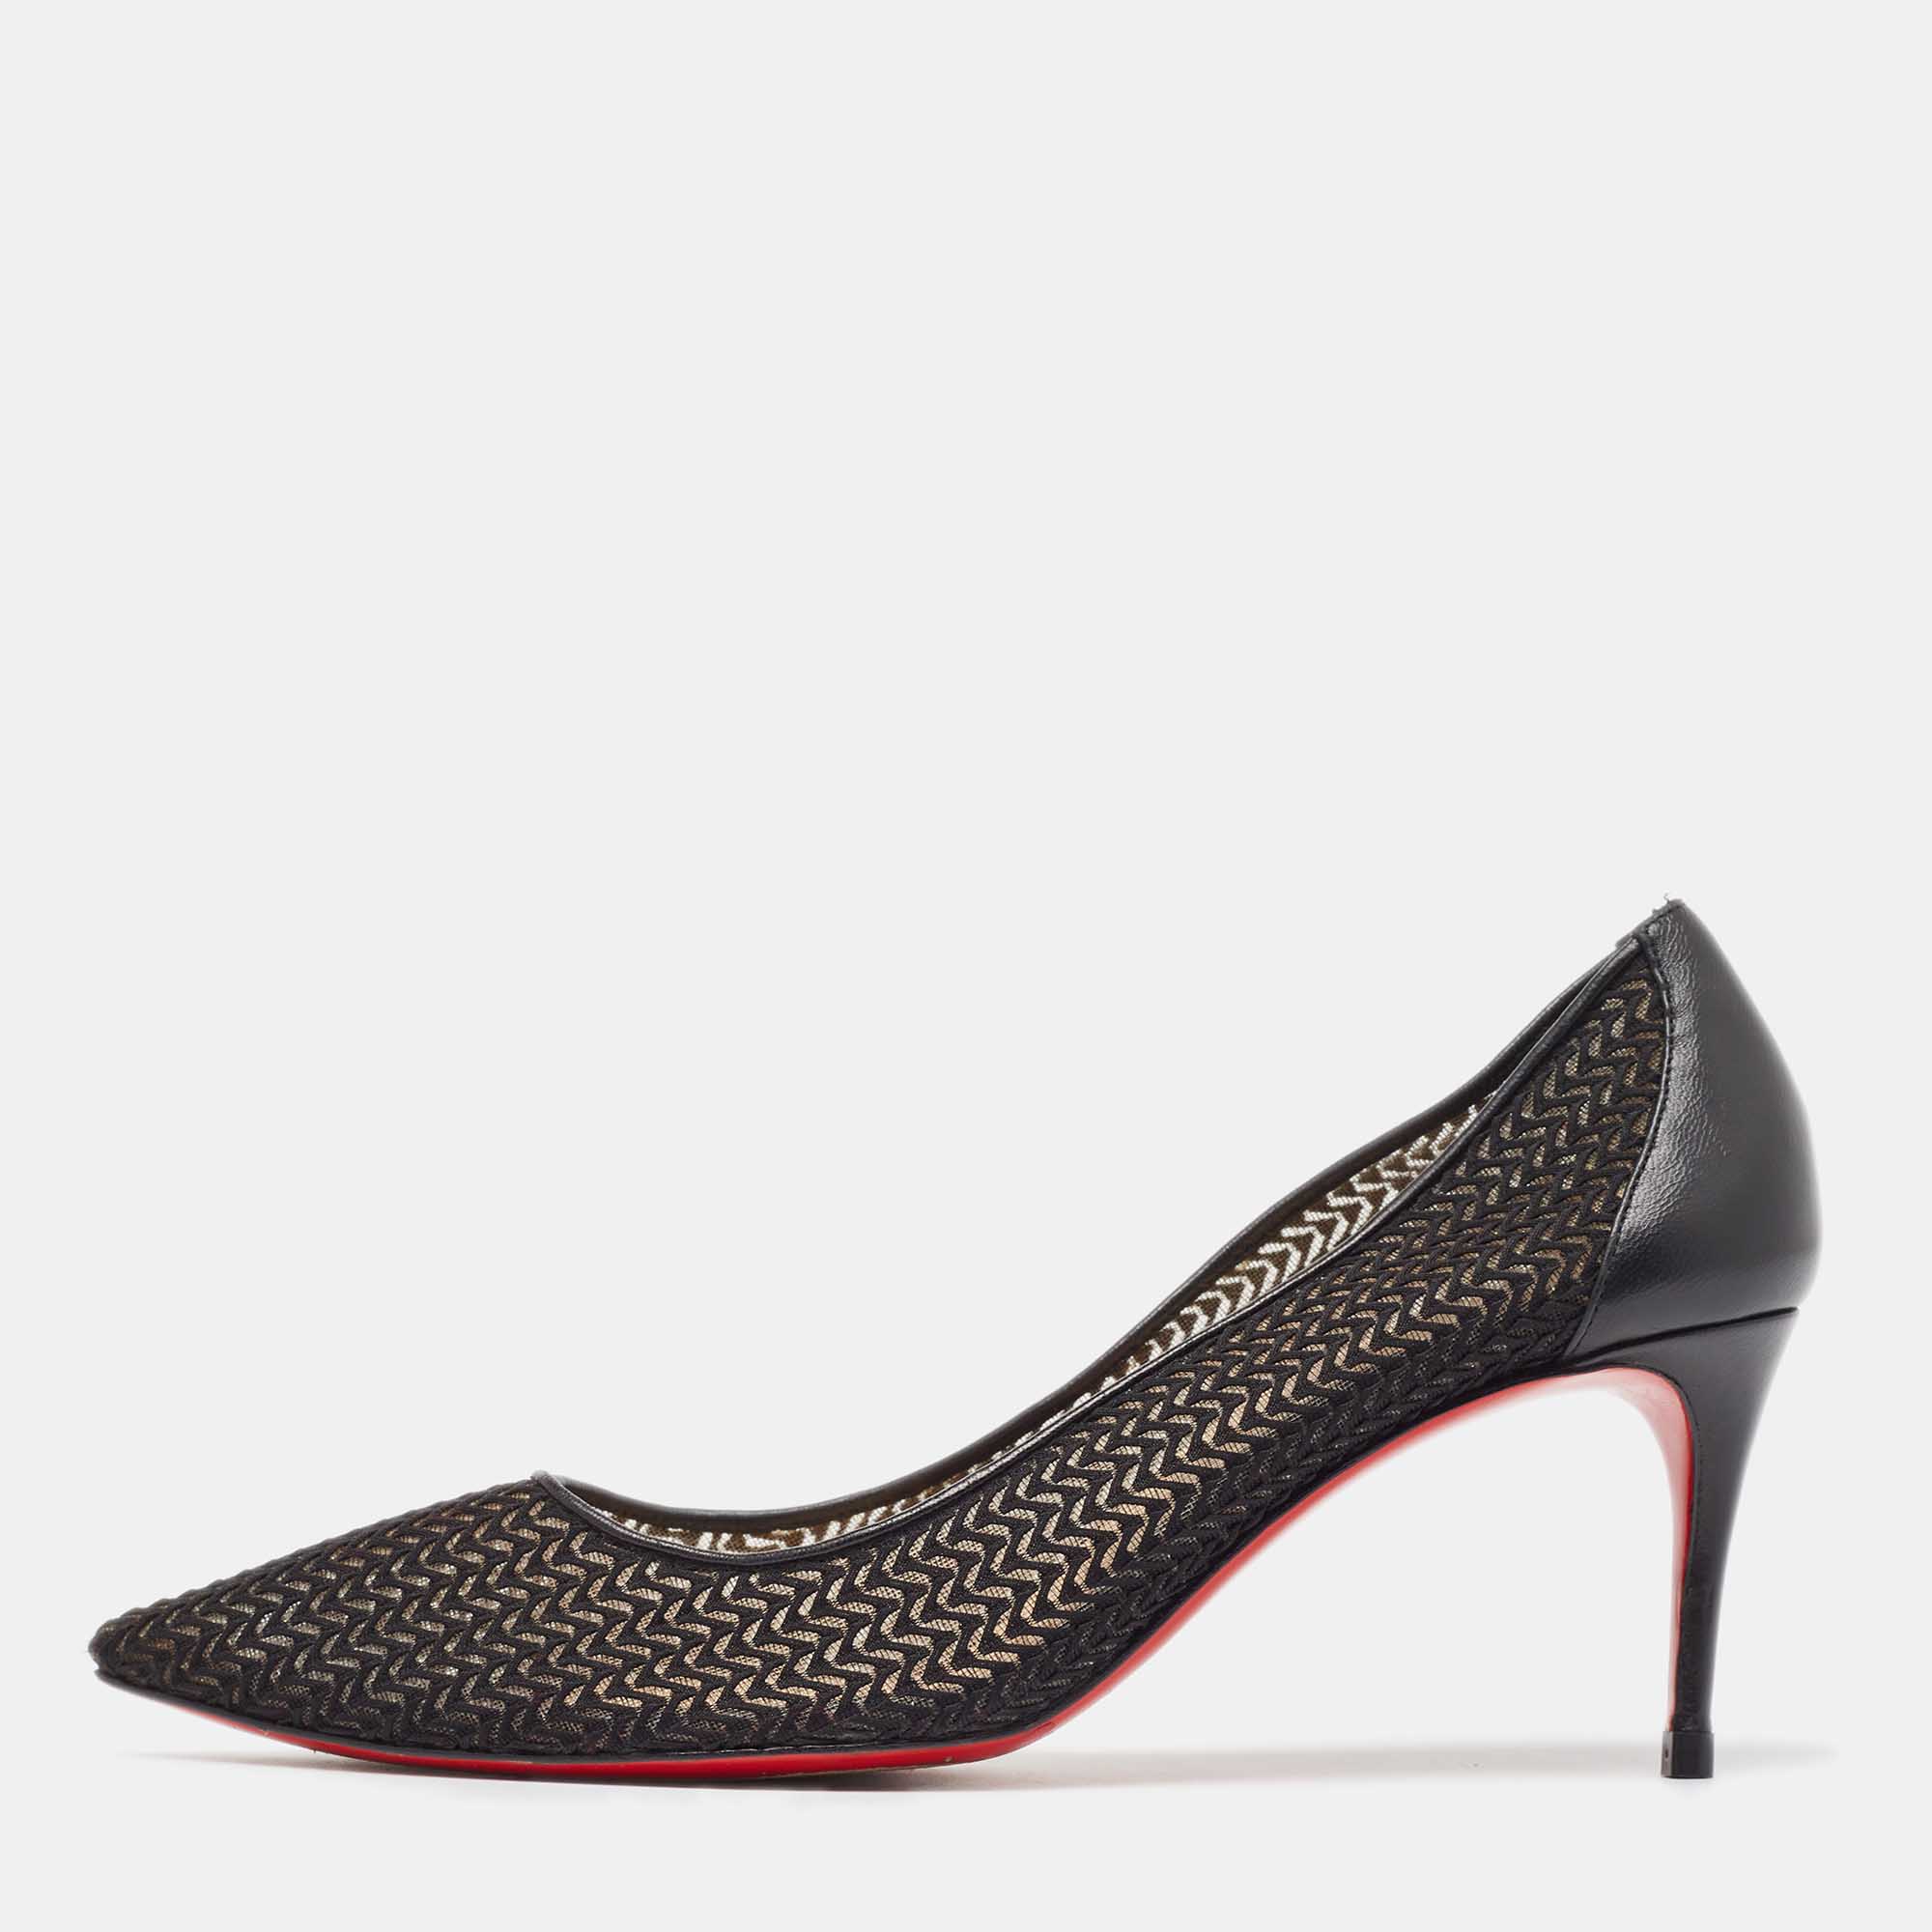 Christian louboutin black mesh and leather saramor maille pumps size 38